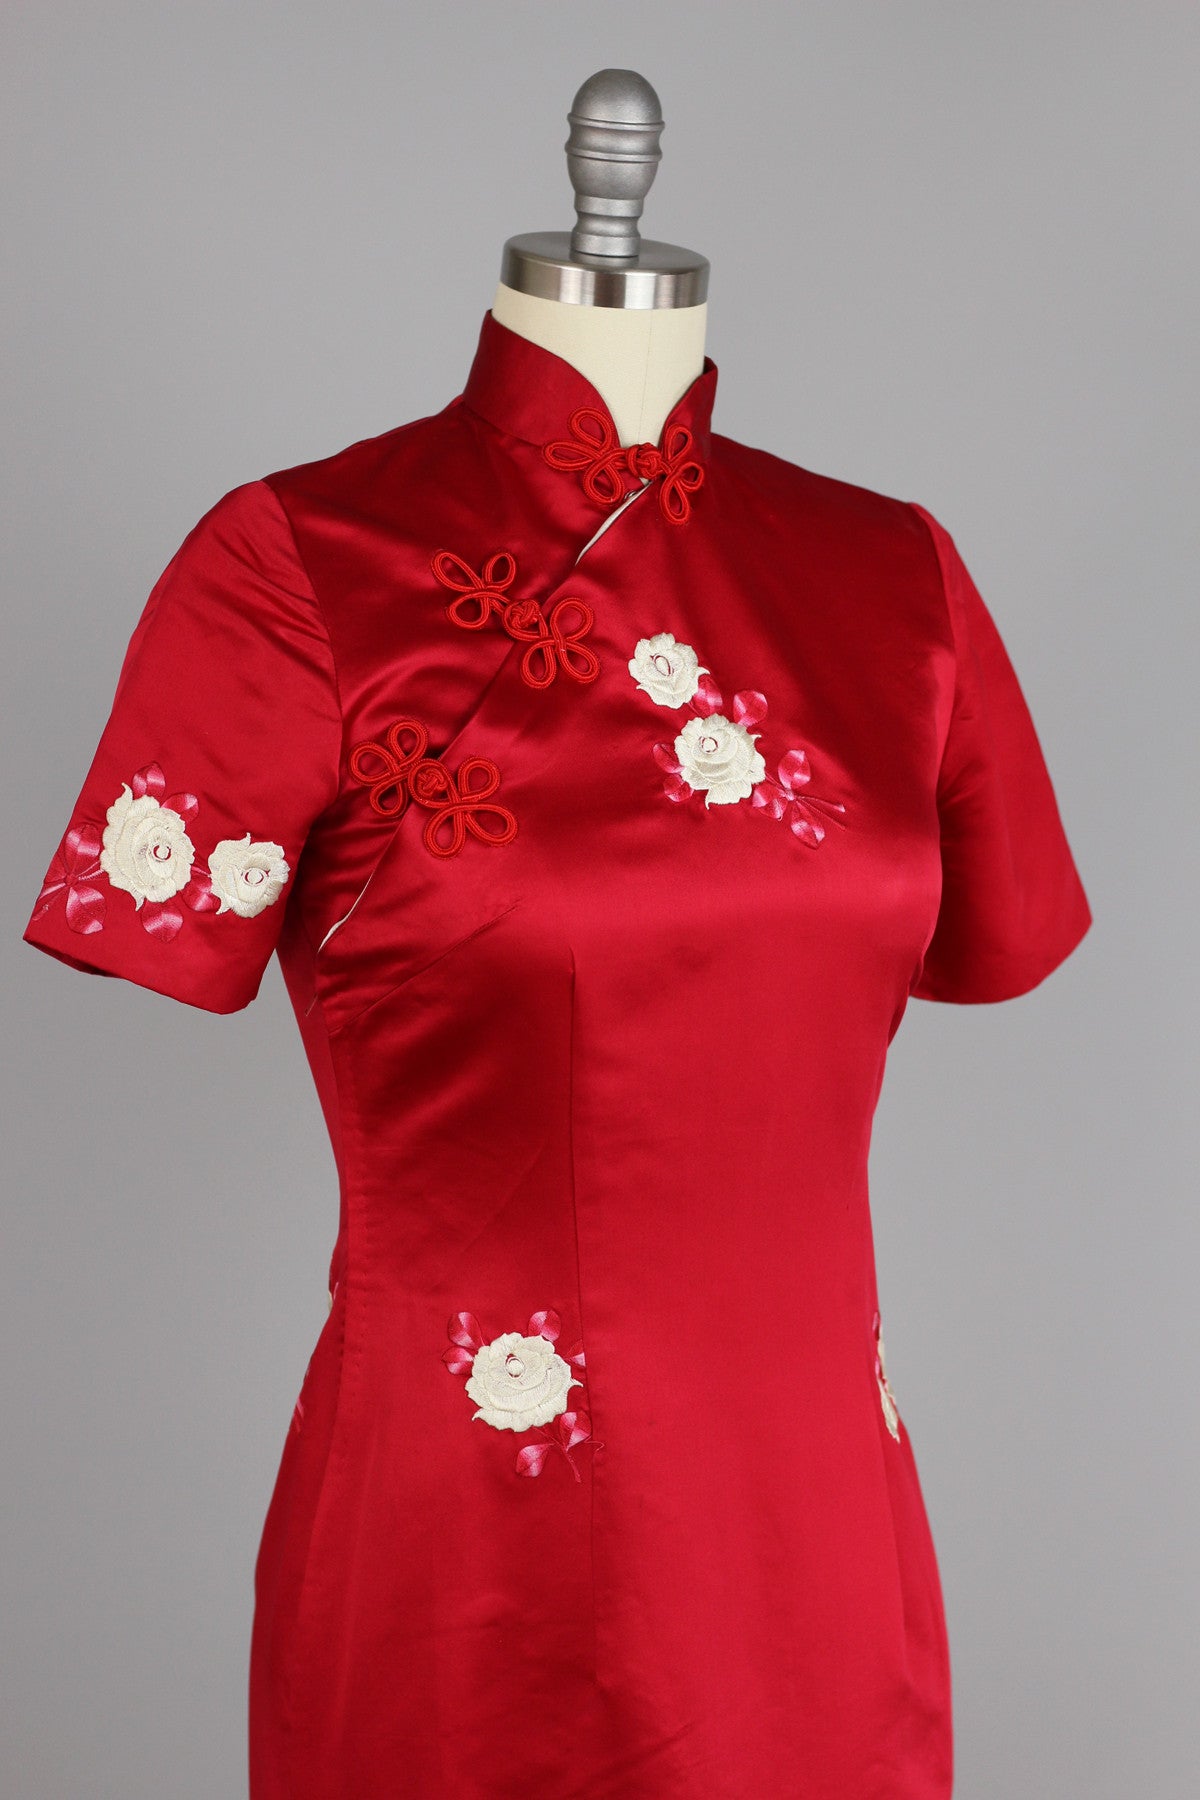 Rare 1960s Vintage Red Satin Full Length Cheongsam with Embroidered Roses